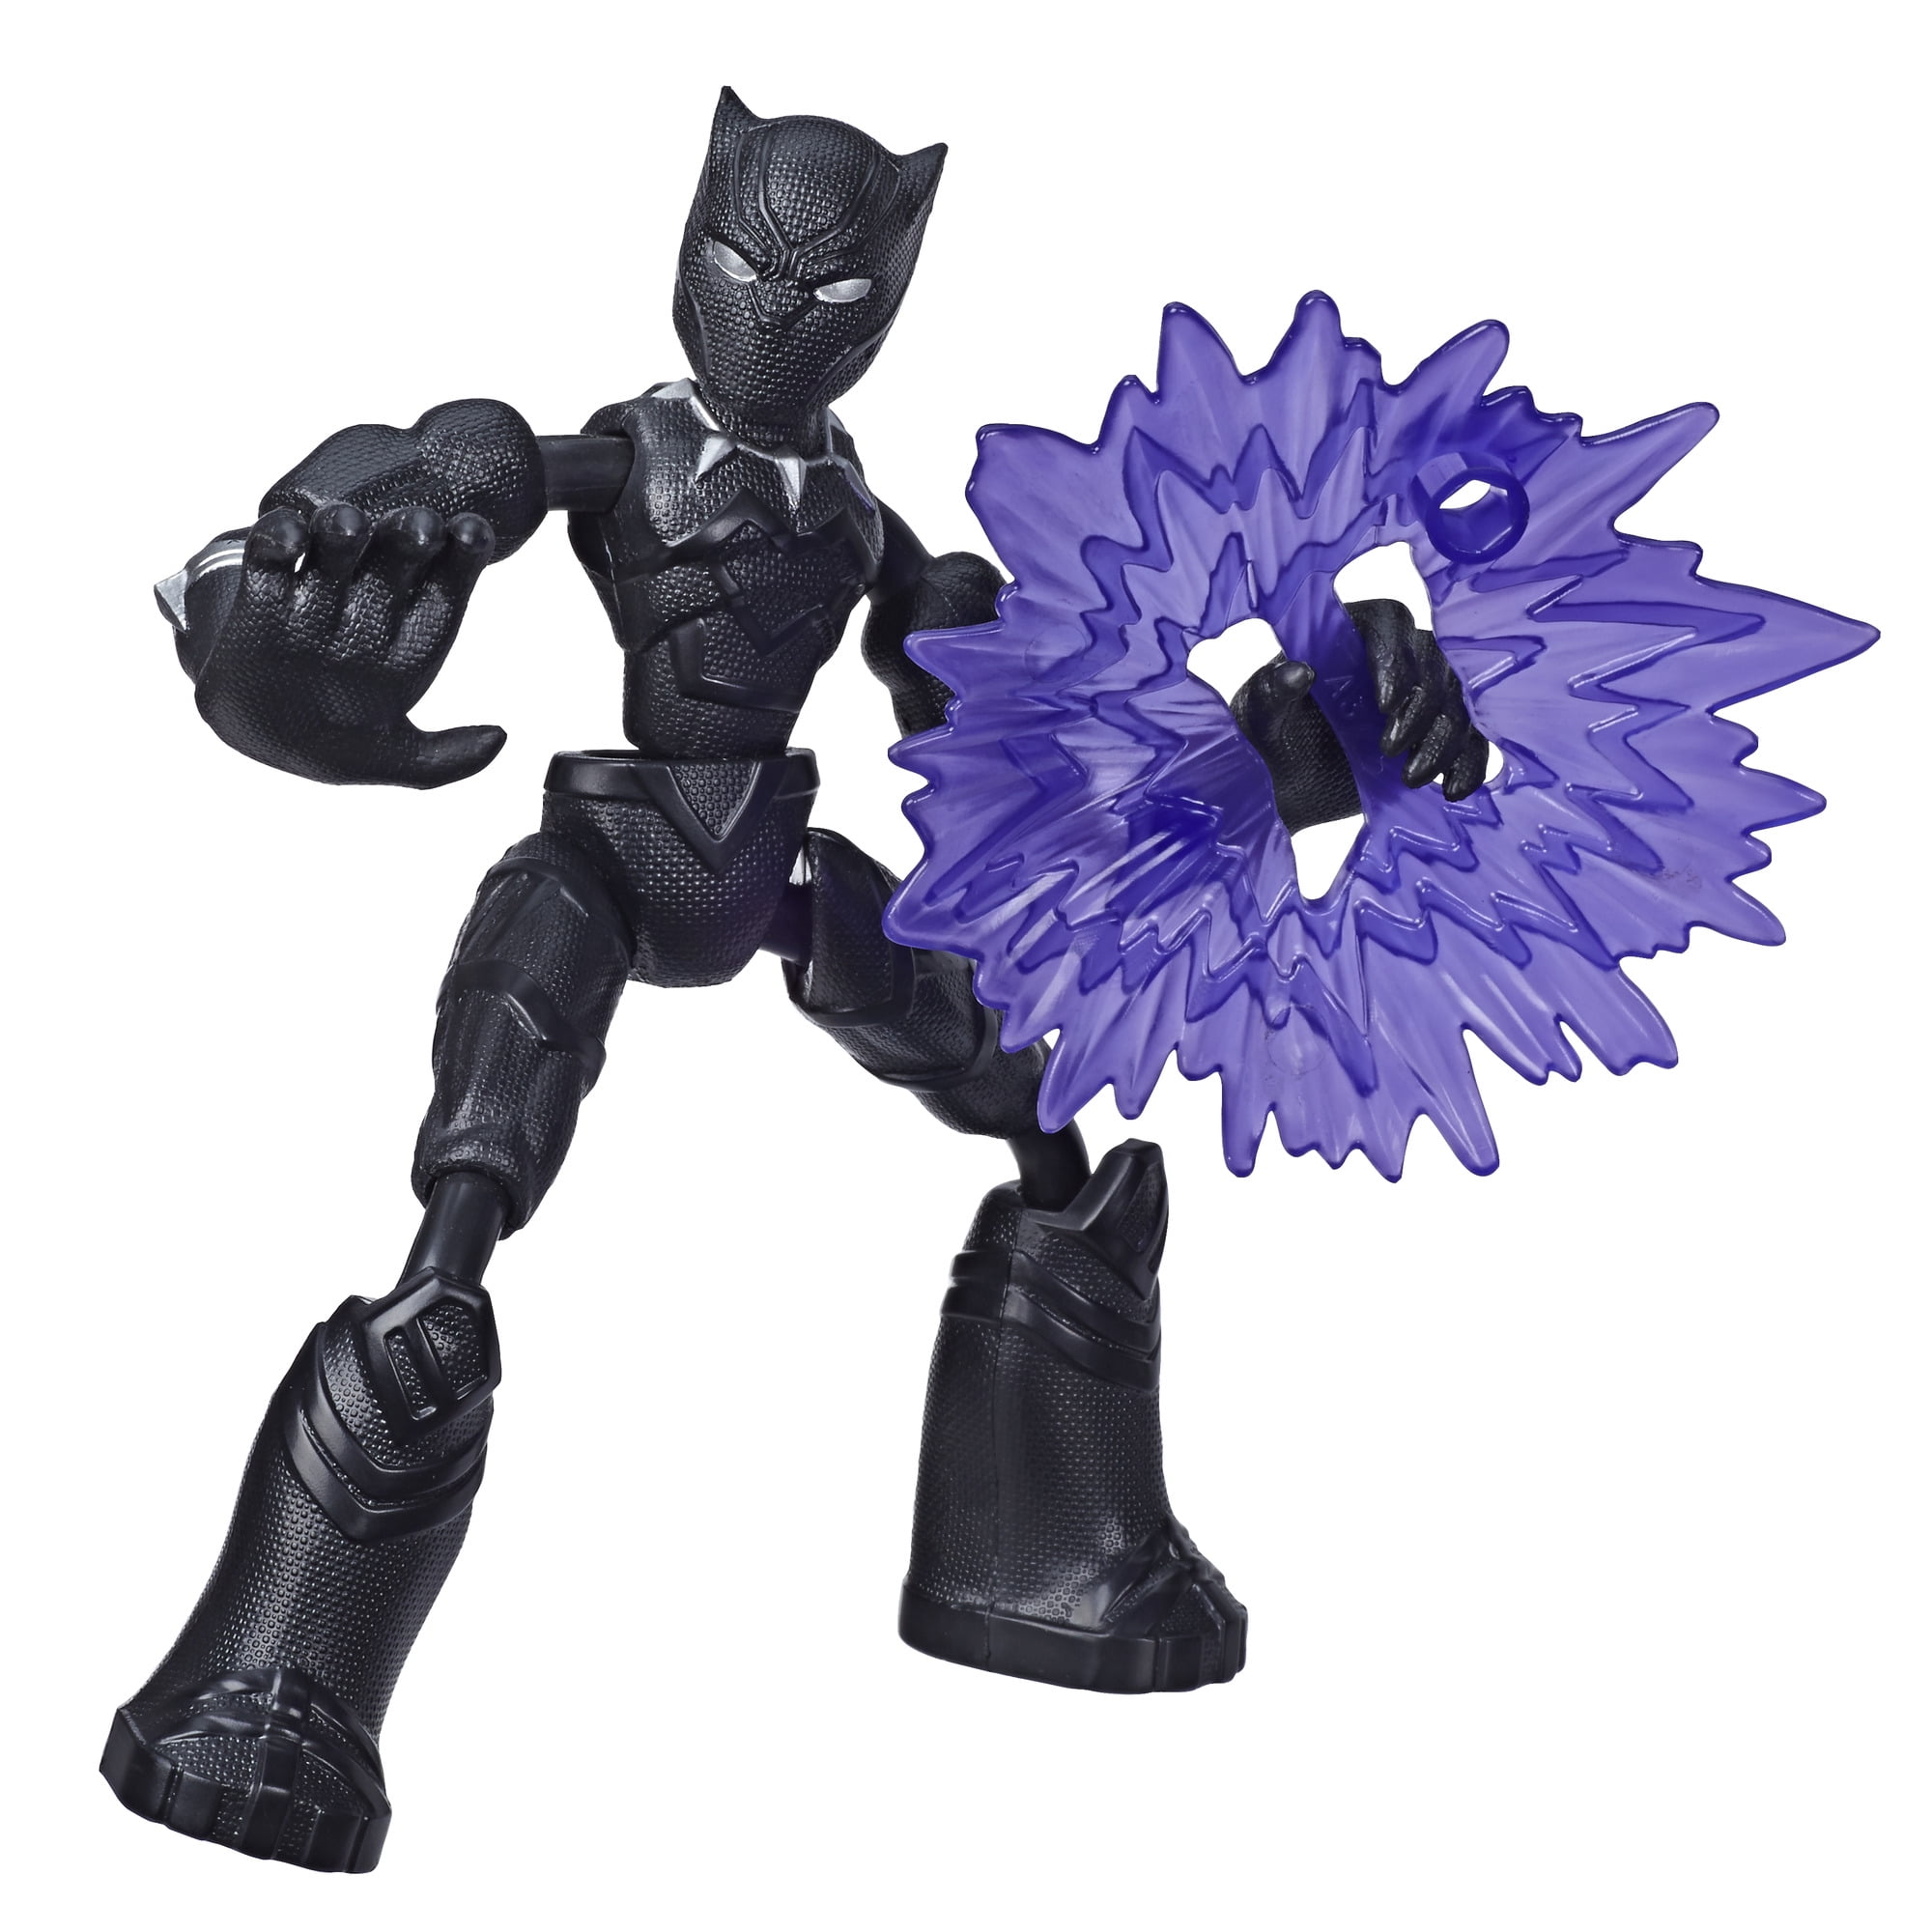 Marvel Avengers Bend And Flex Black Panther, Includes